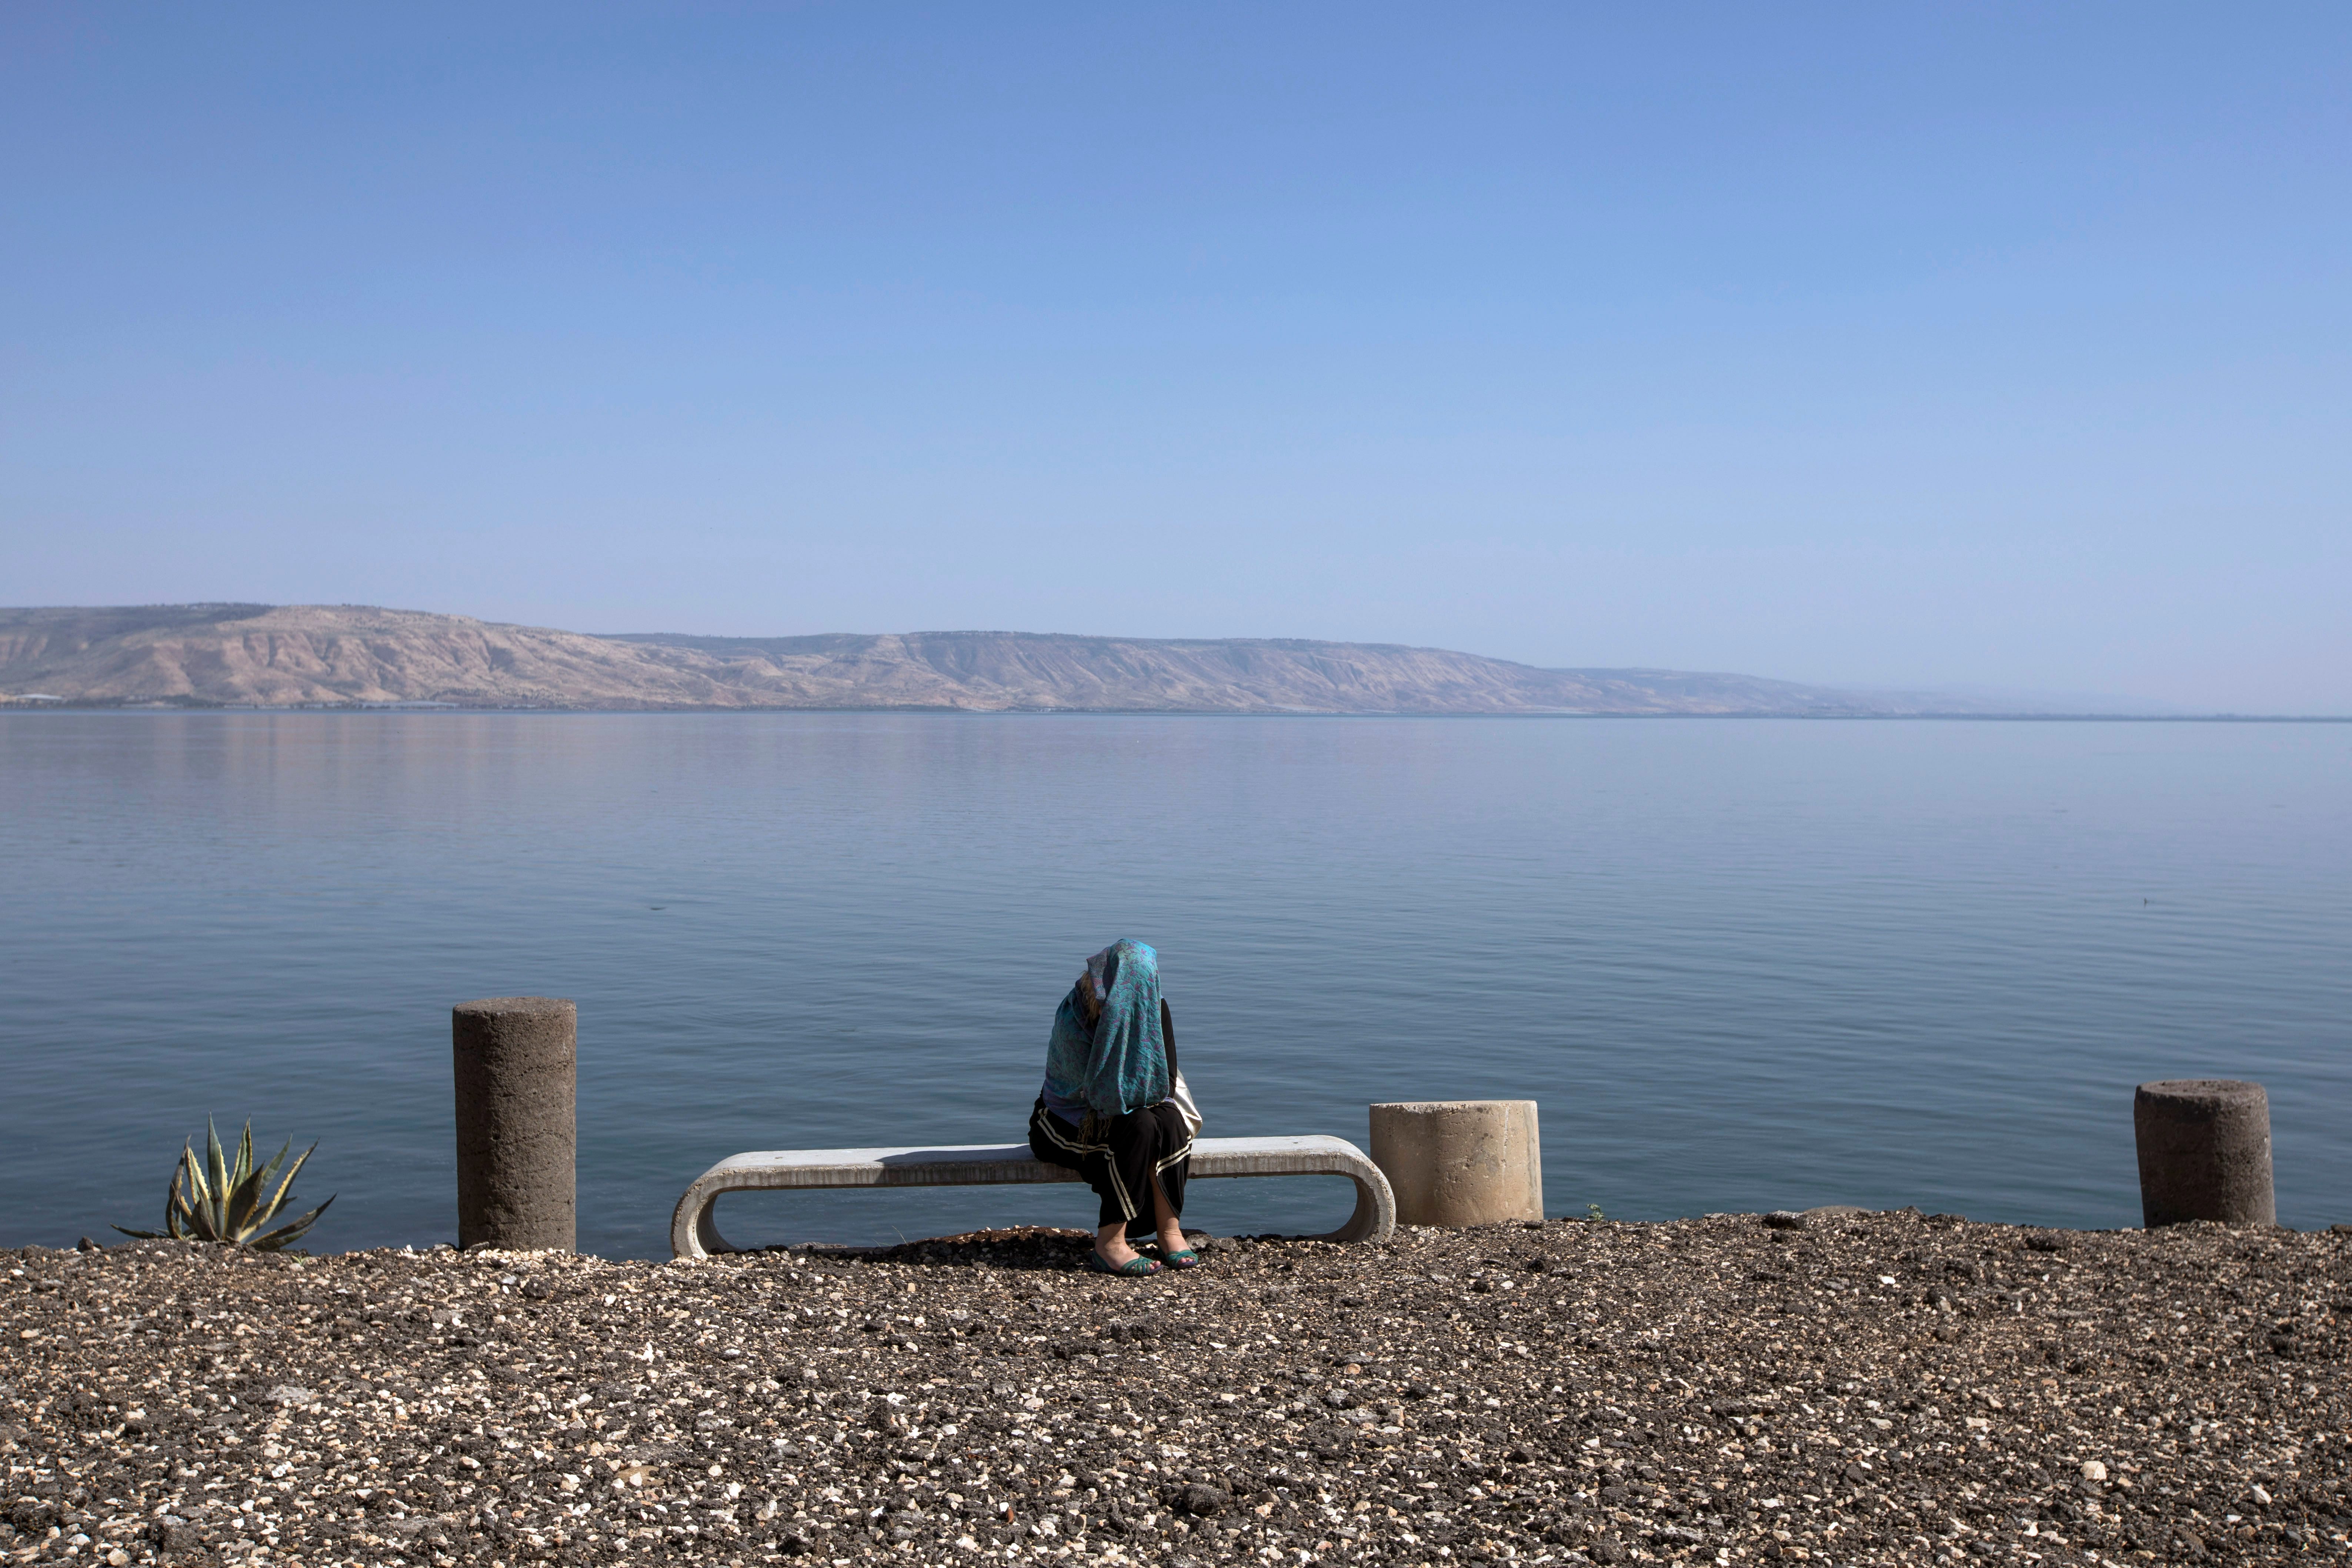 A traveler sits at the Sea of Galilee in Capernaum, the home town of Jesus, as part of the Jesus Trail in Capernaum, northern Israel.